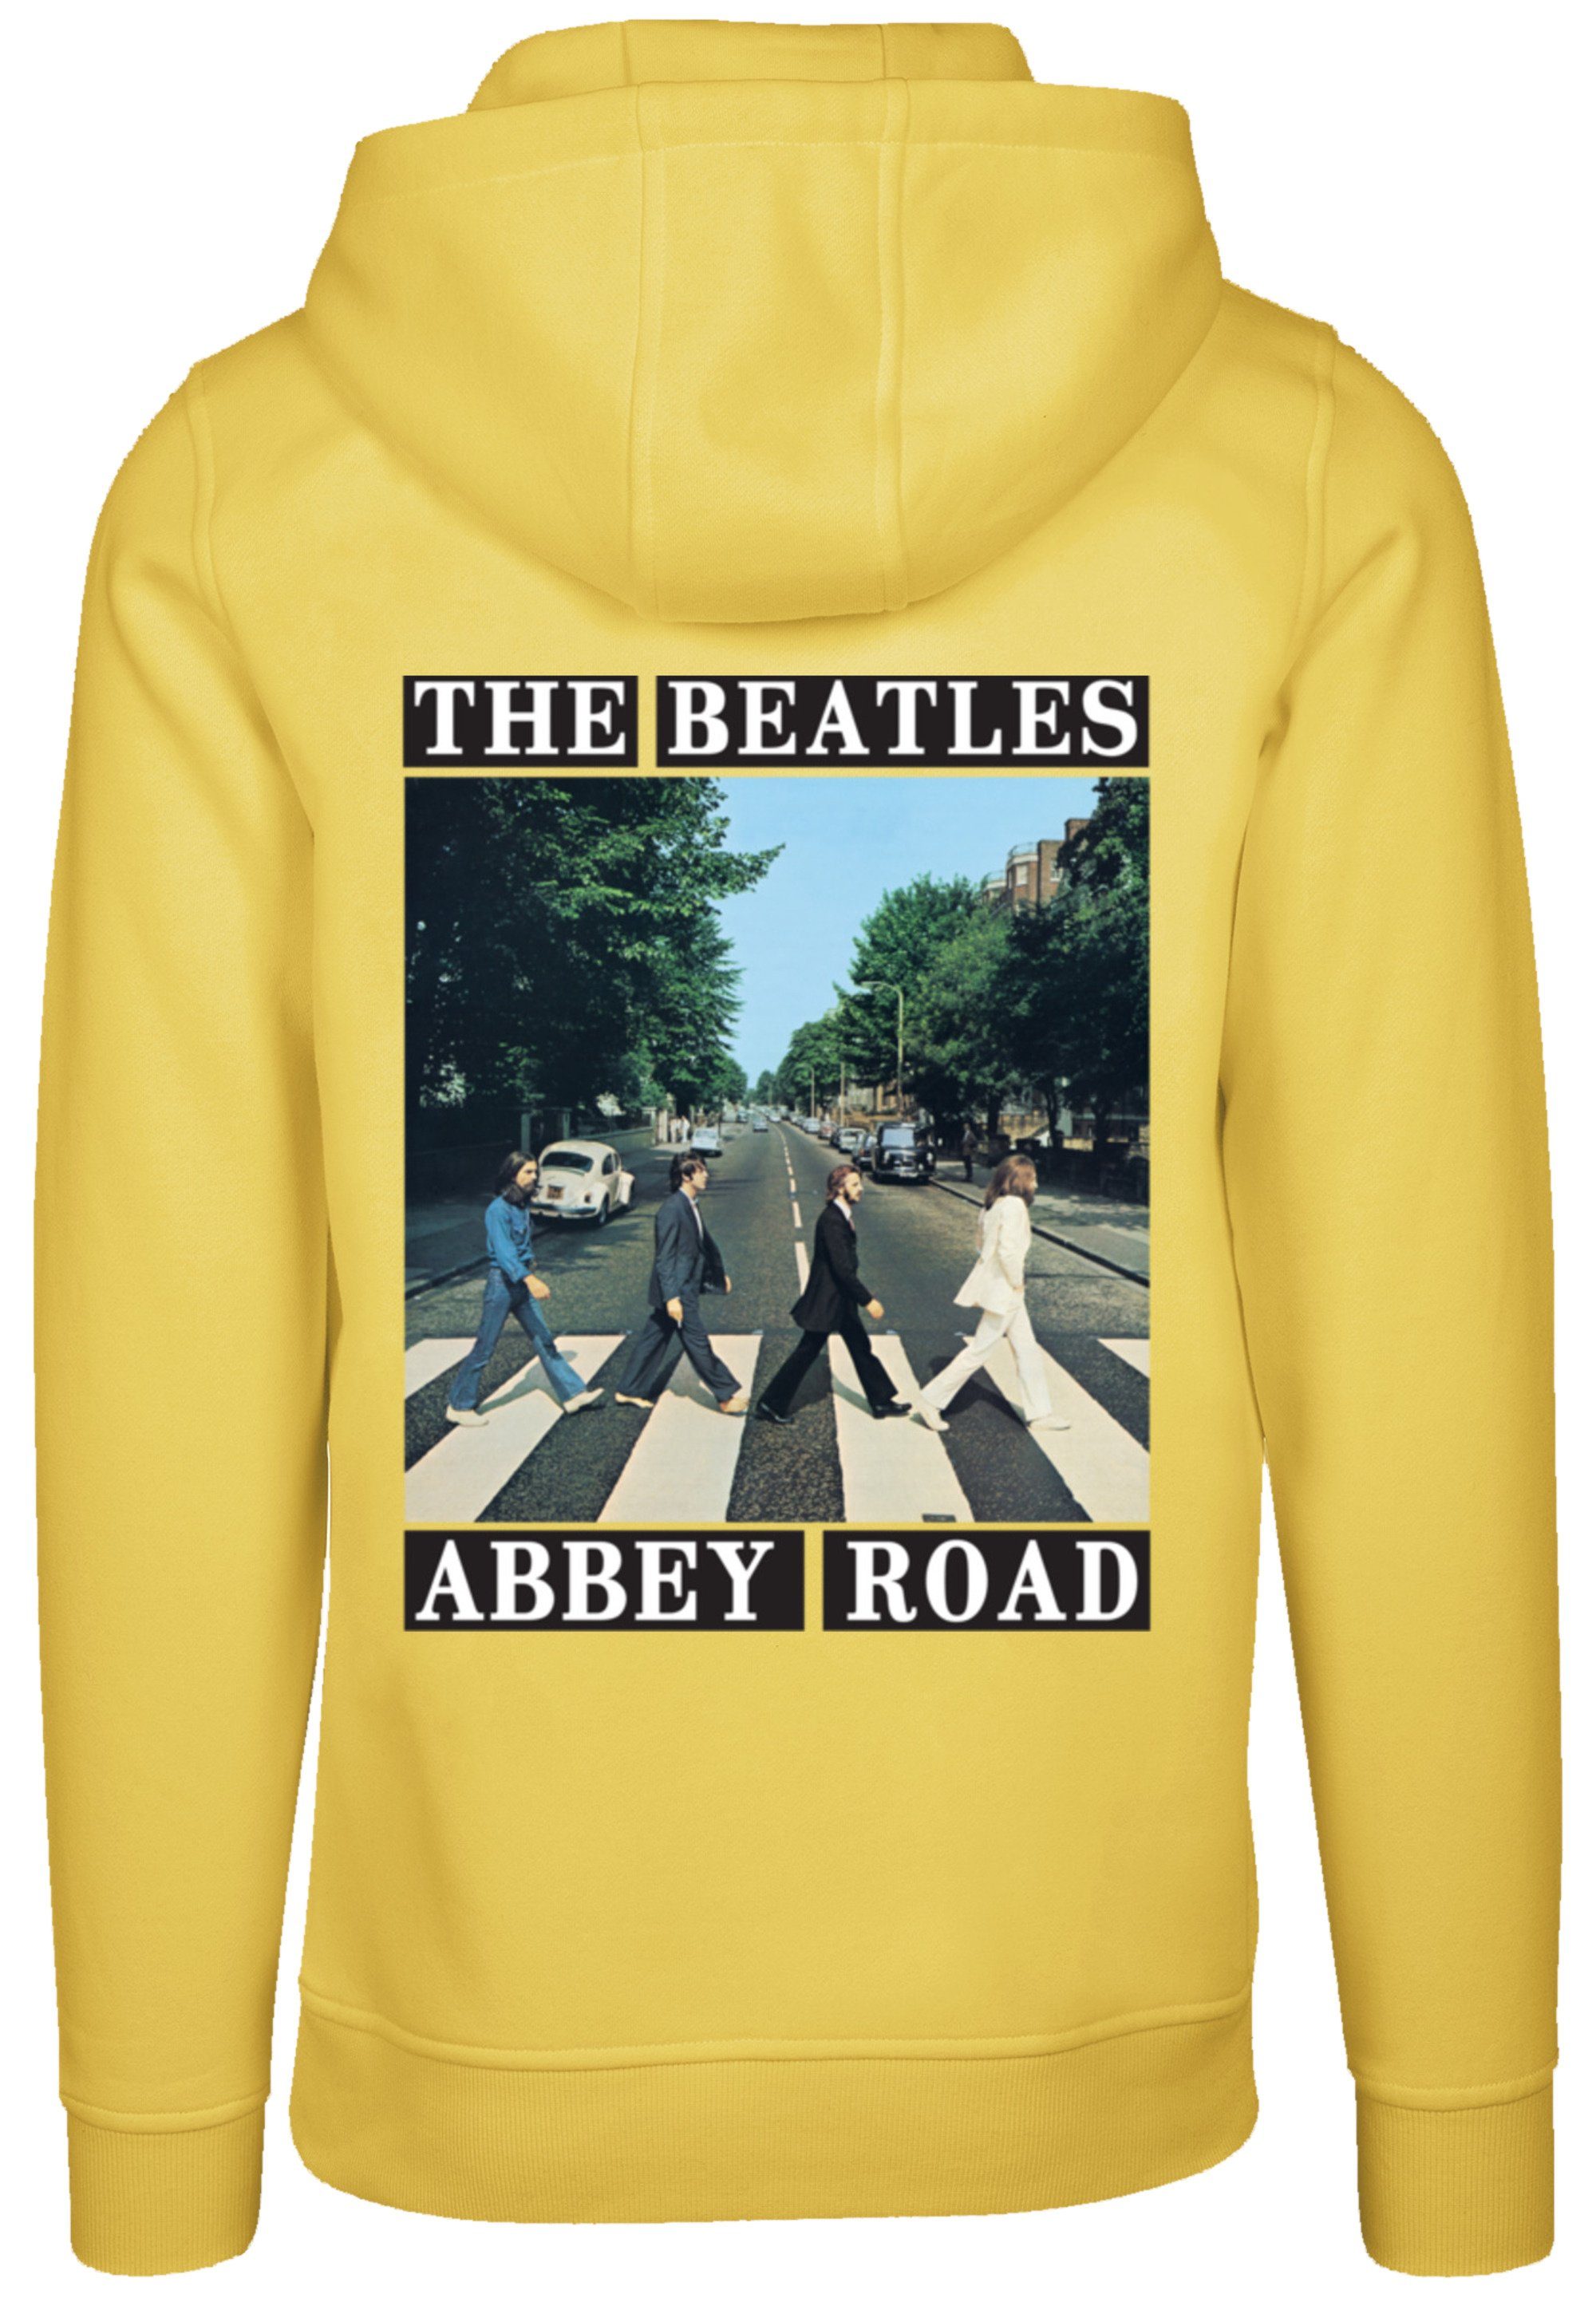 F4NT4STIC Kapuzenpullover The Beatles Abbey Road Rock Musik Band Hoodie, Warm, Bequem taxi yellow